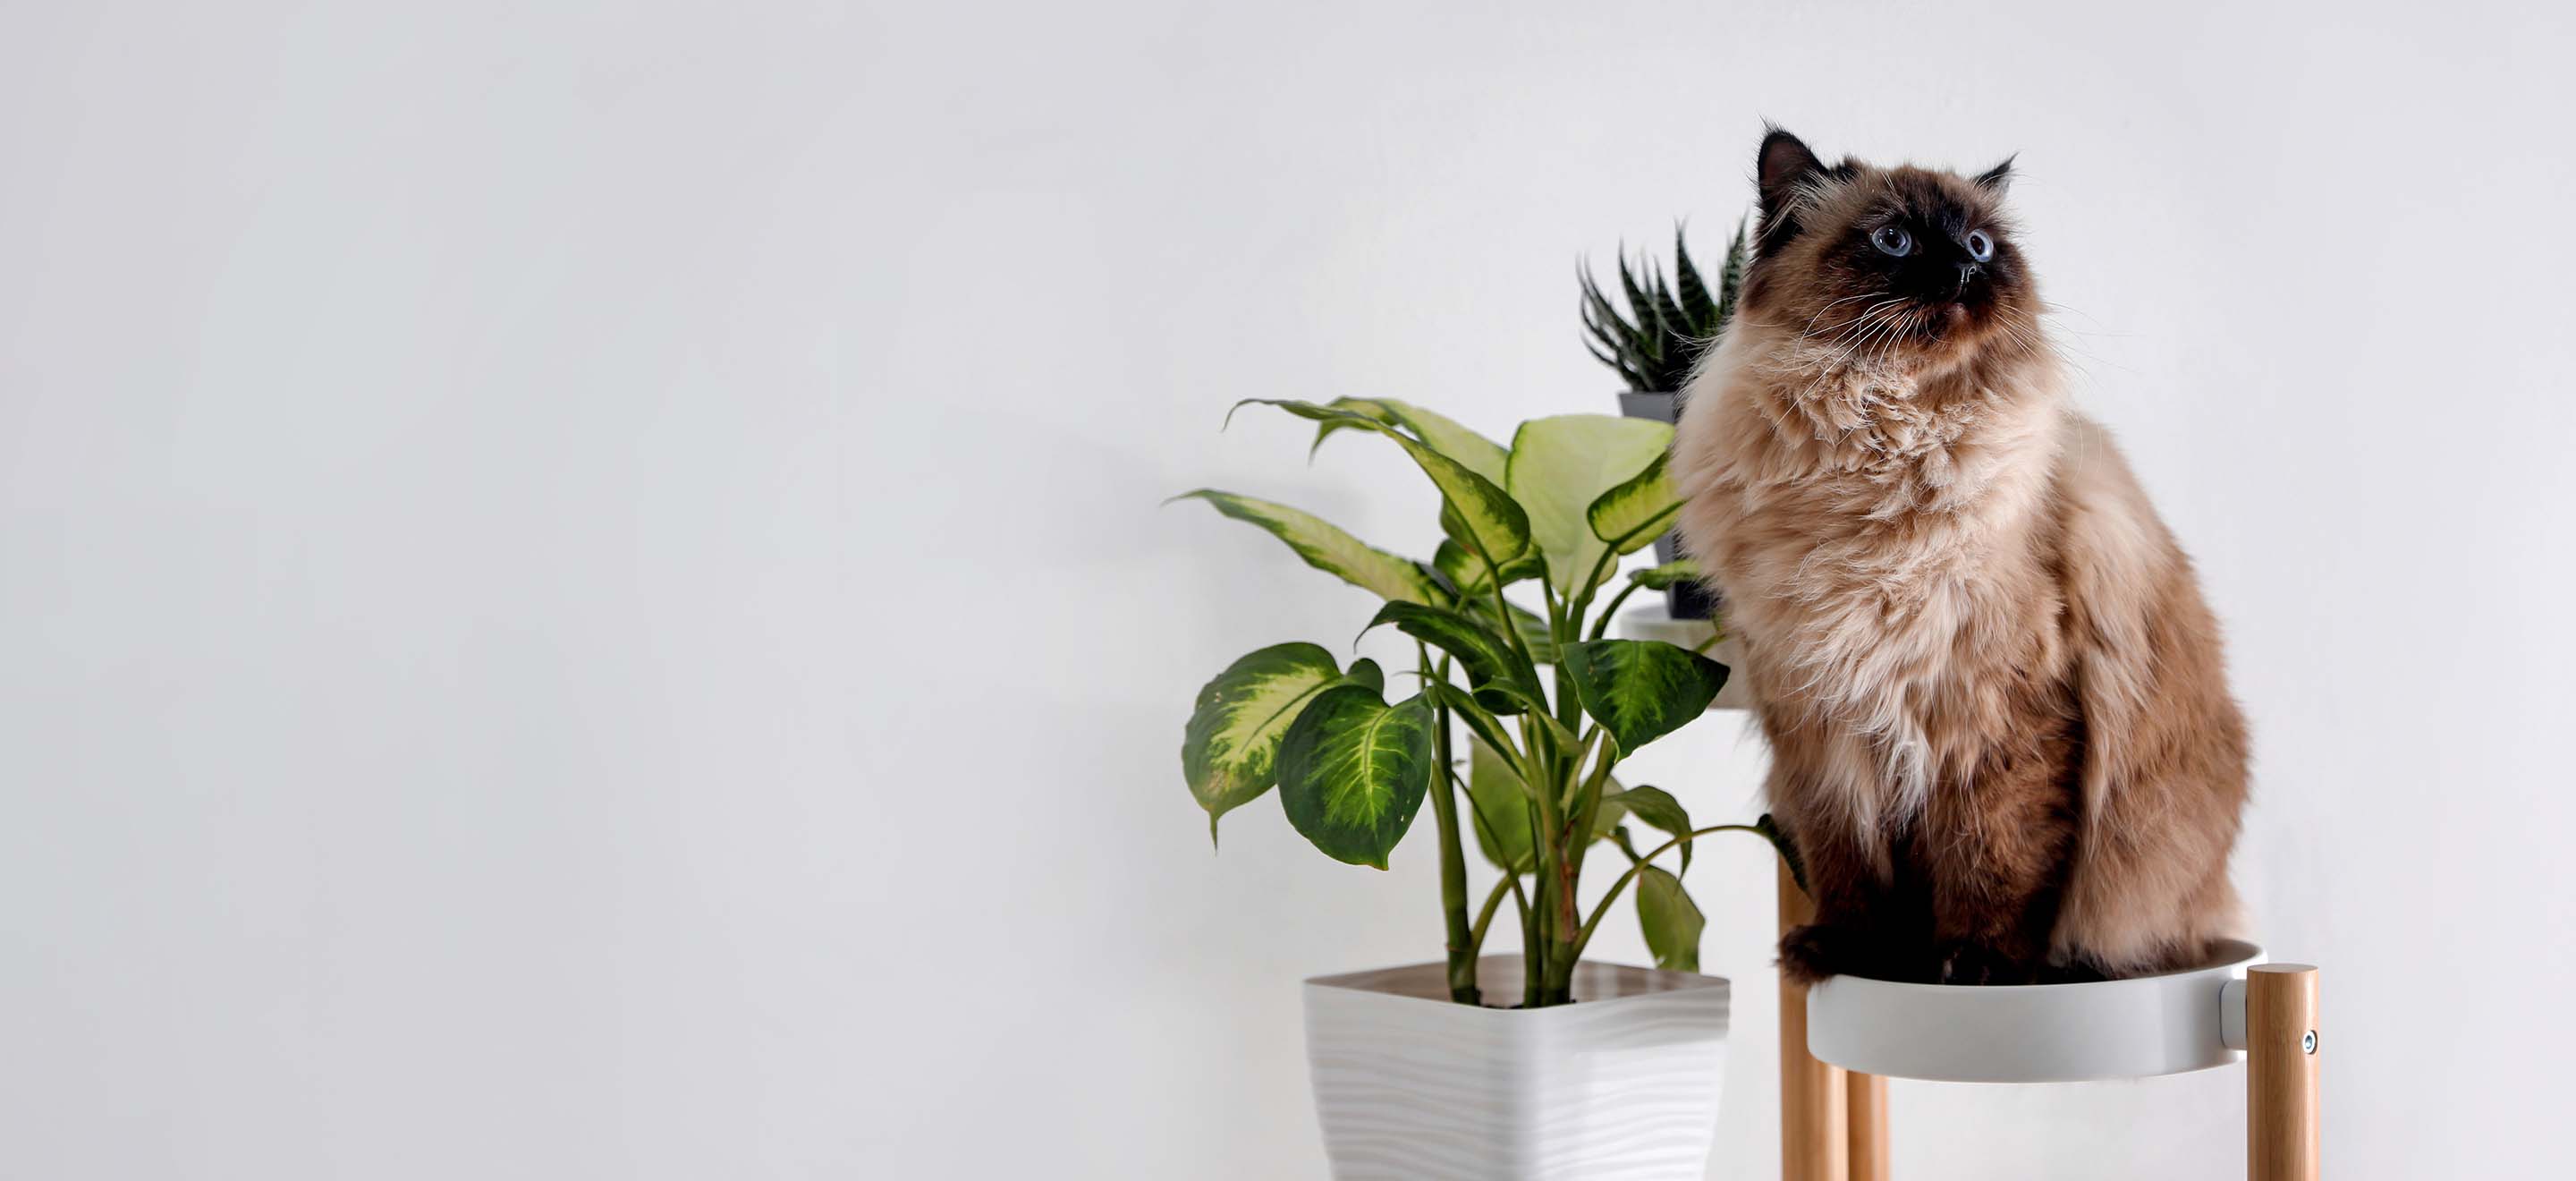 Balinese cat sitting on a plant stand next to some potted plants image